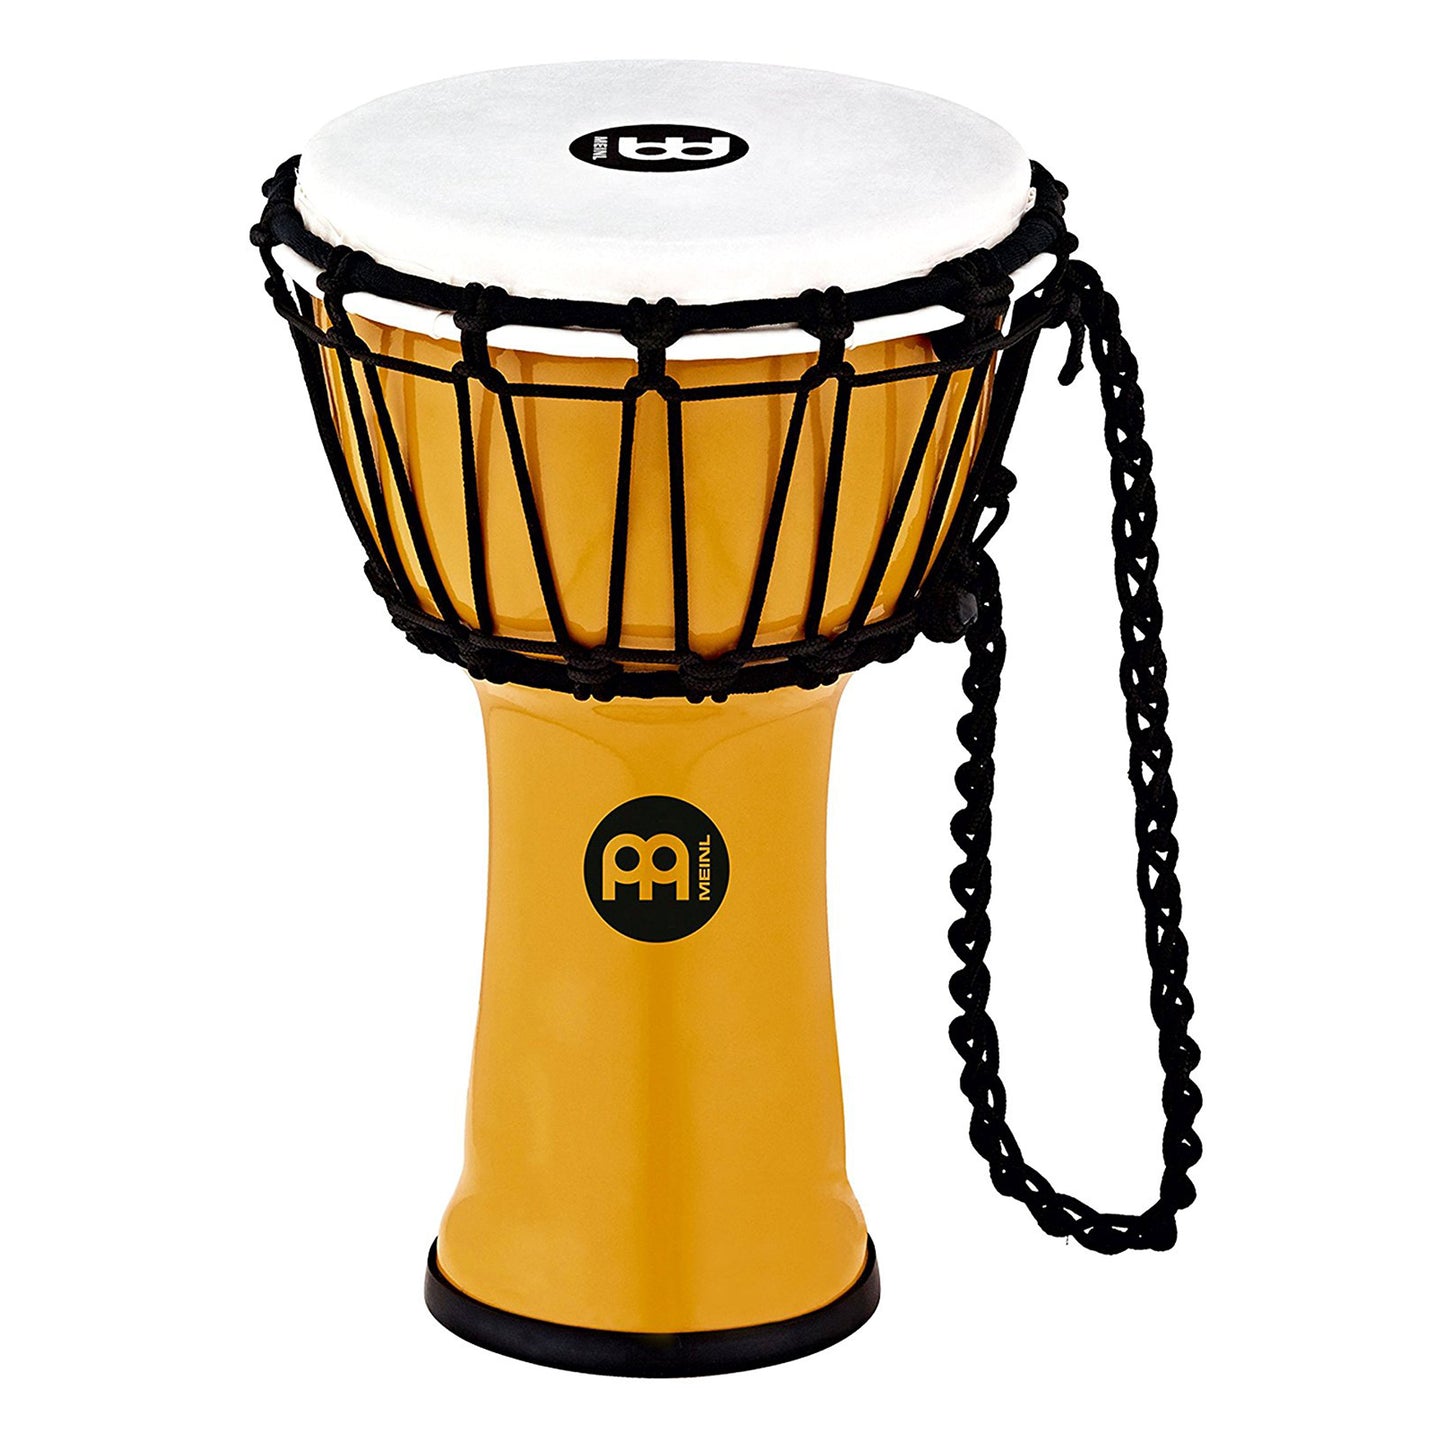 Meinl Percussion JRD-Y Synthetic Compact Junior Djembe, 7" Diameter, Yellow